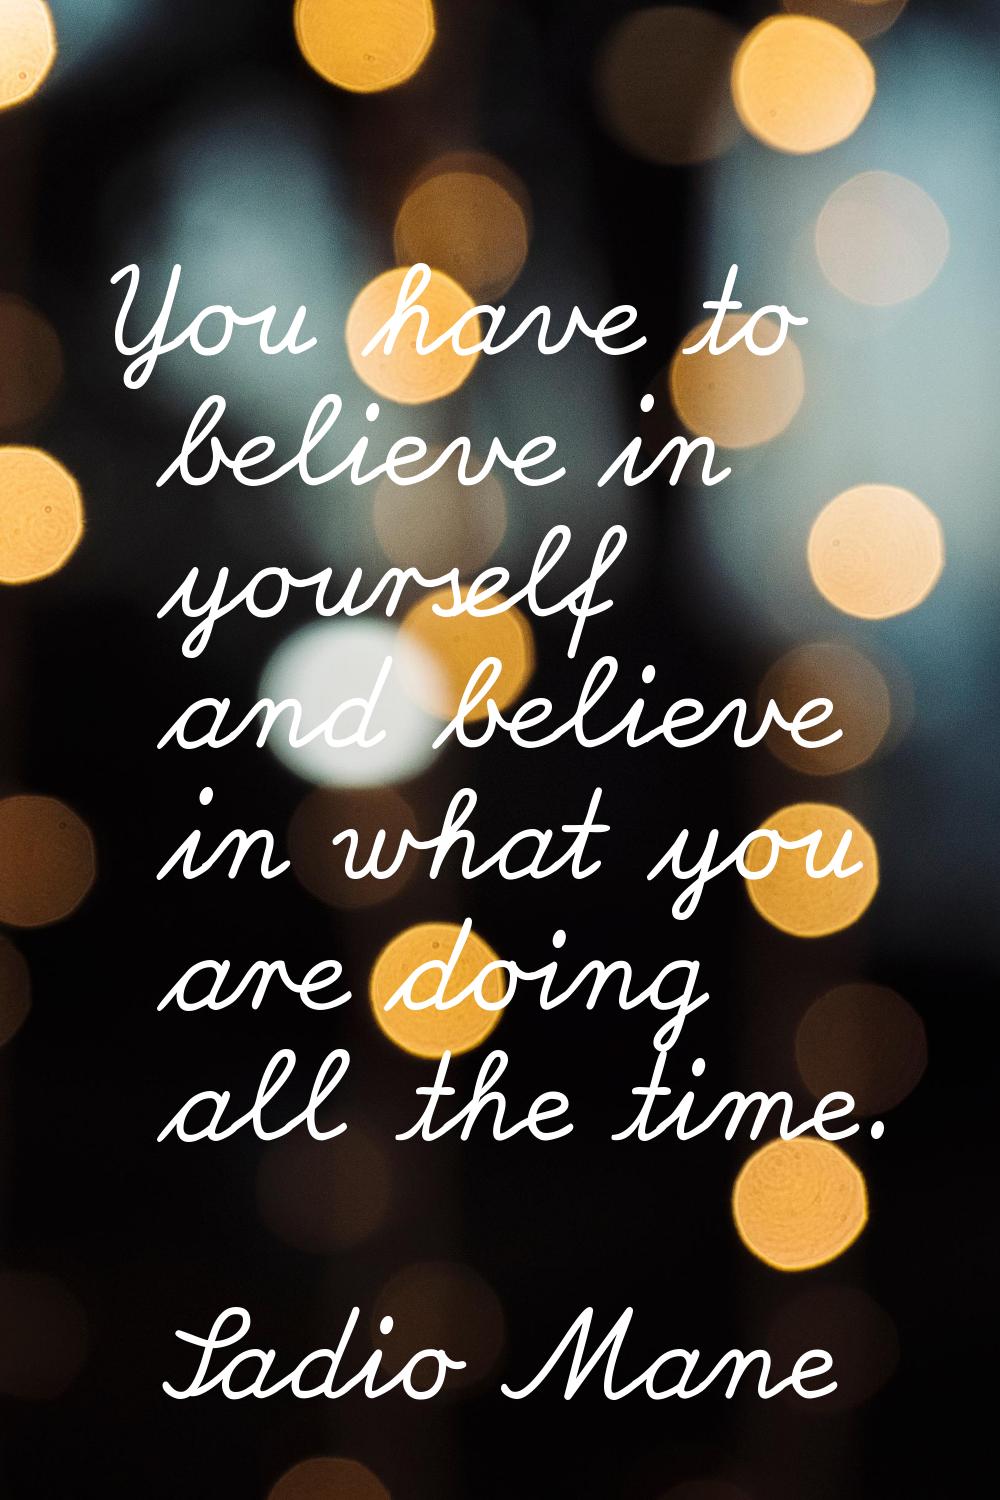 You have to believe in yourself and believe in what you are doing all the time.